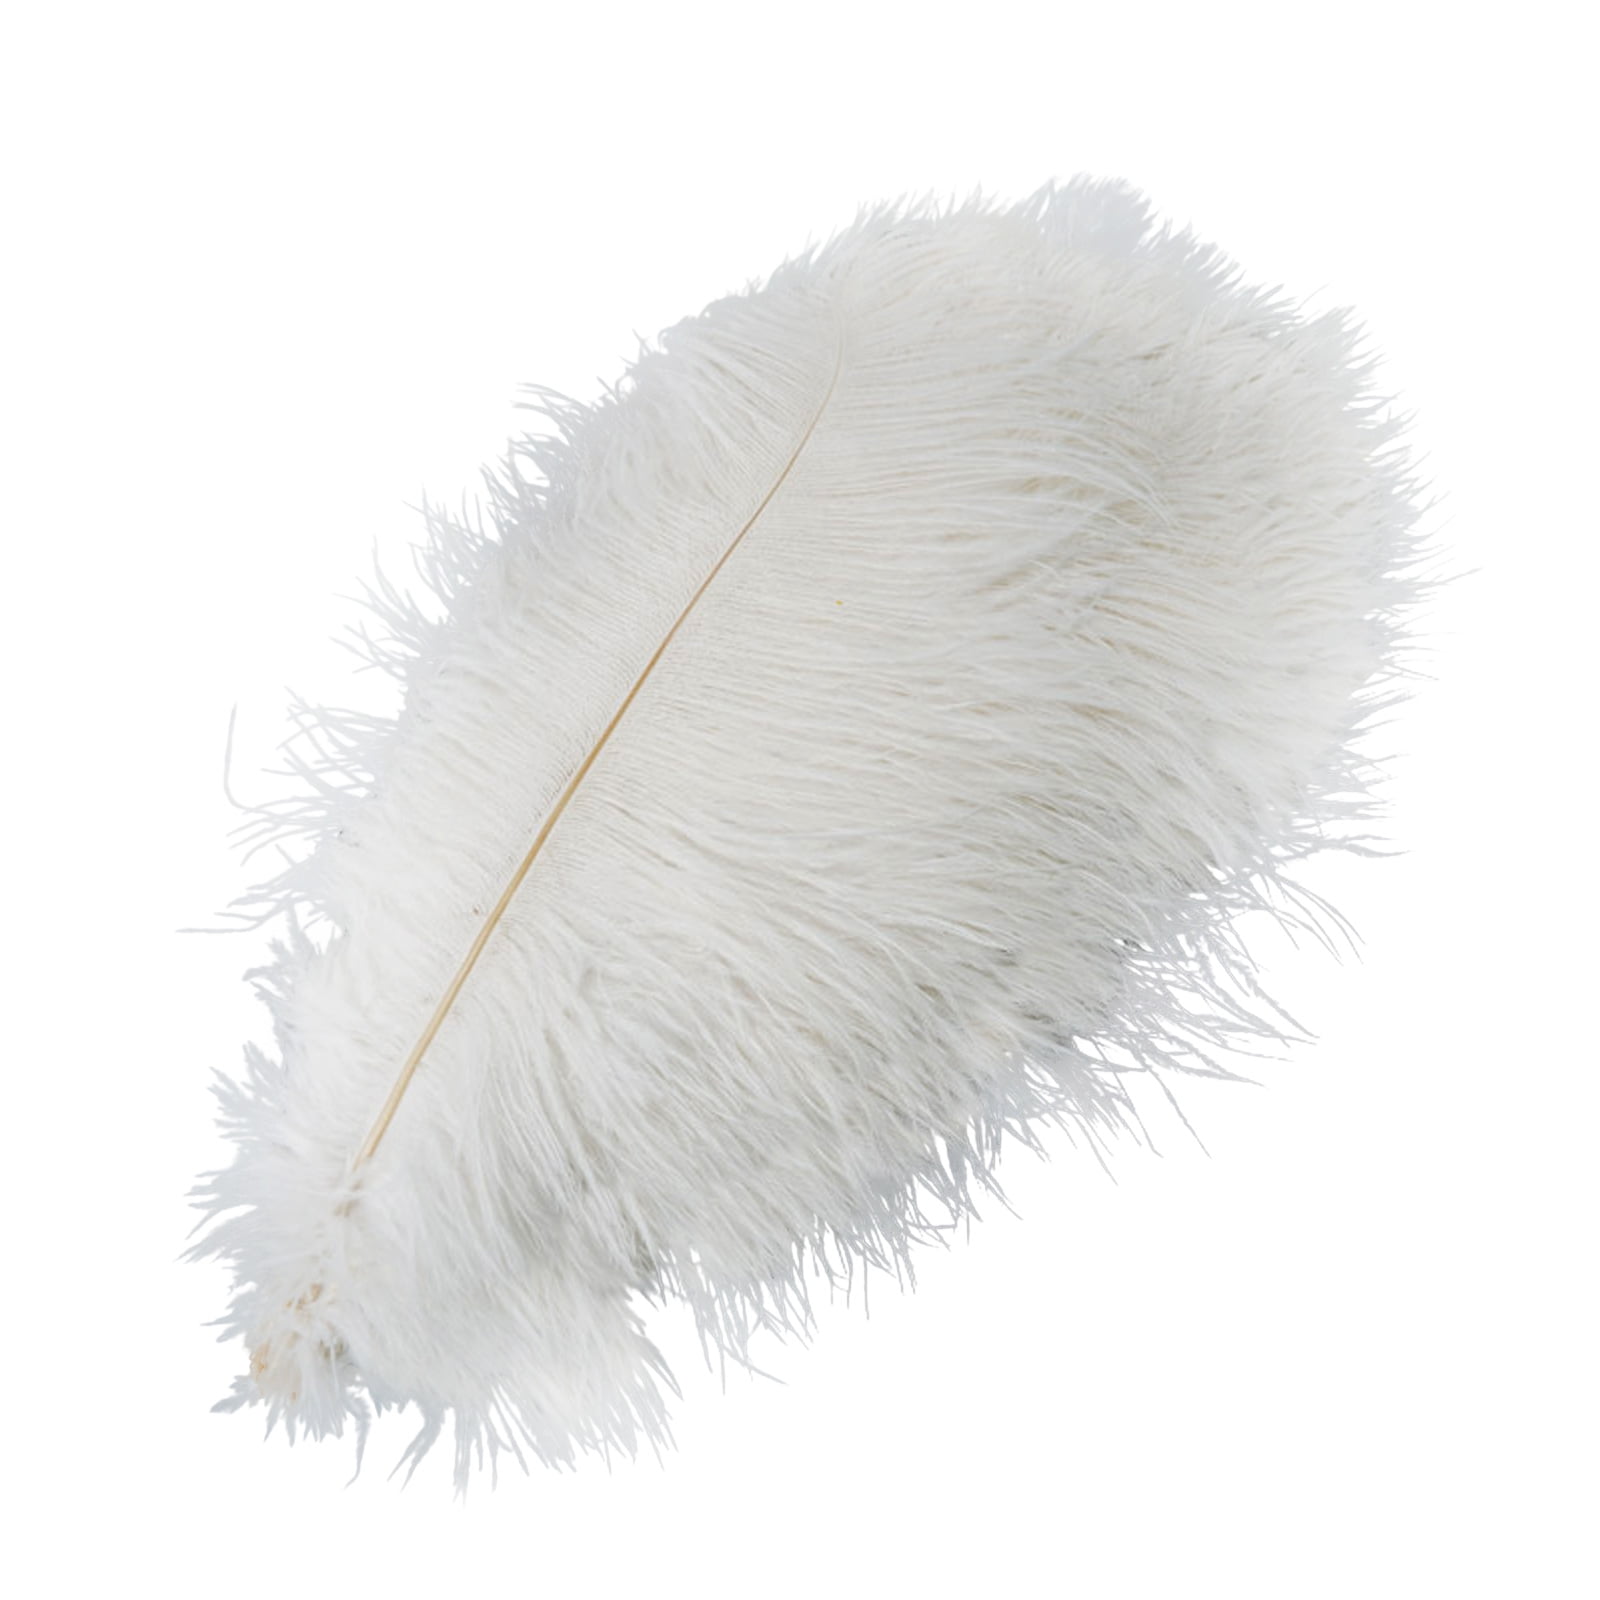 Details about   10/20x White Natural Ostrich Feather Home Wedding Party Decor 30-35cm DIY Crafts